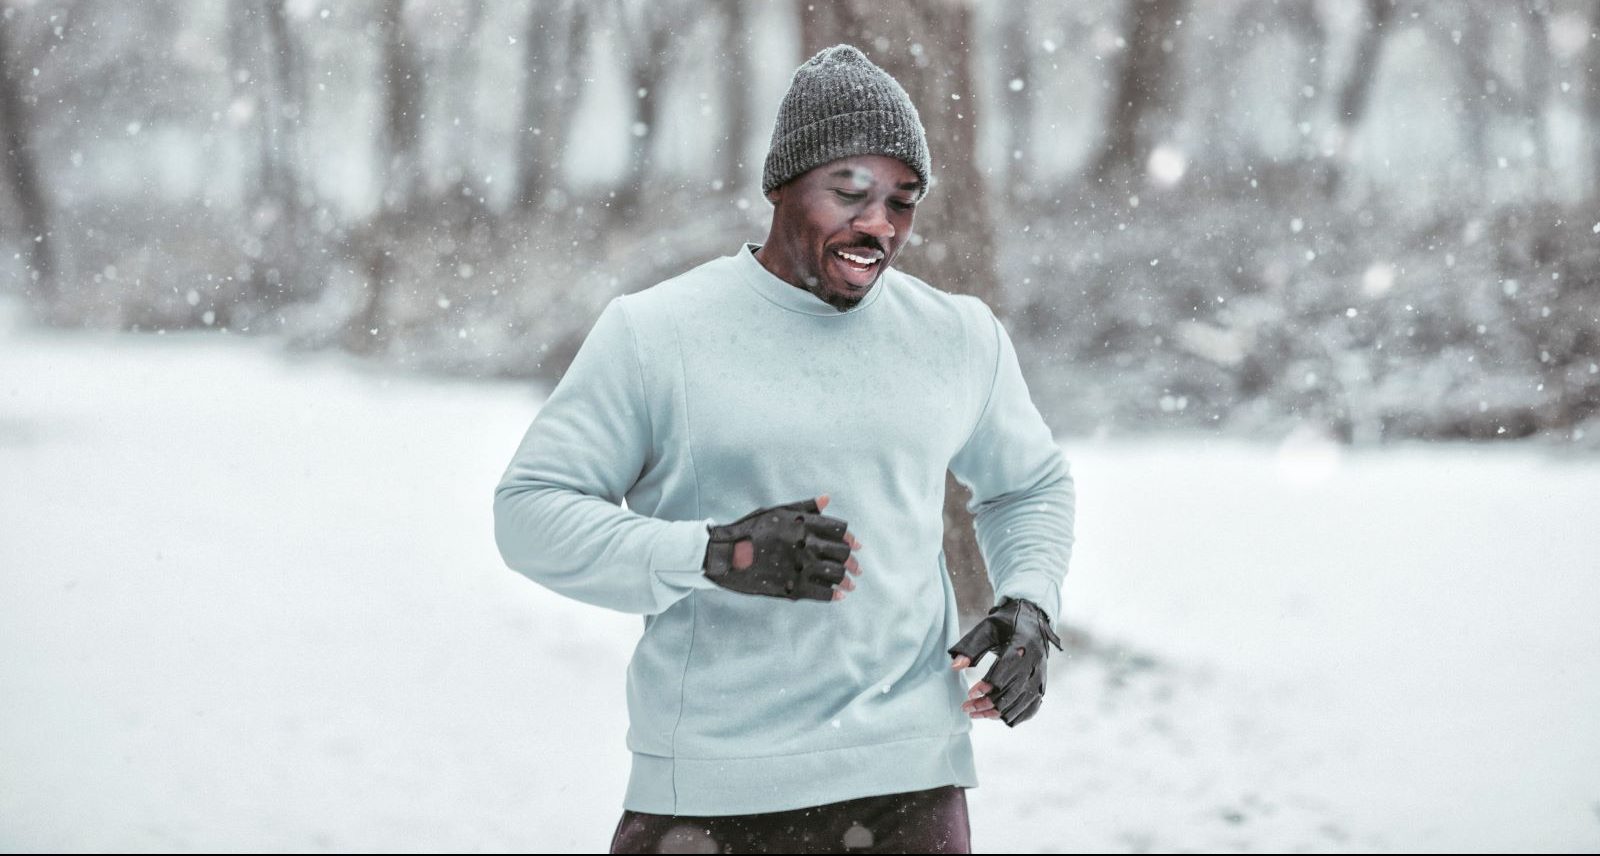 8 Tips to Exercise Safely This Winter